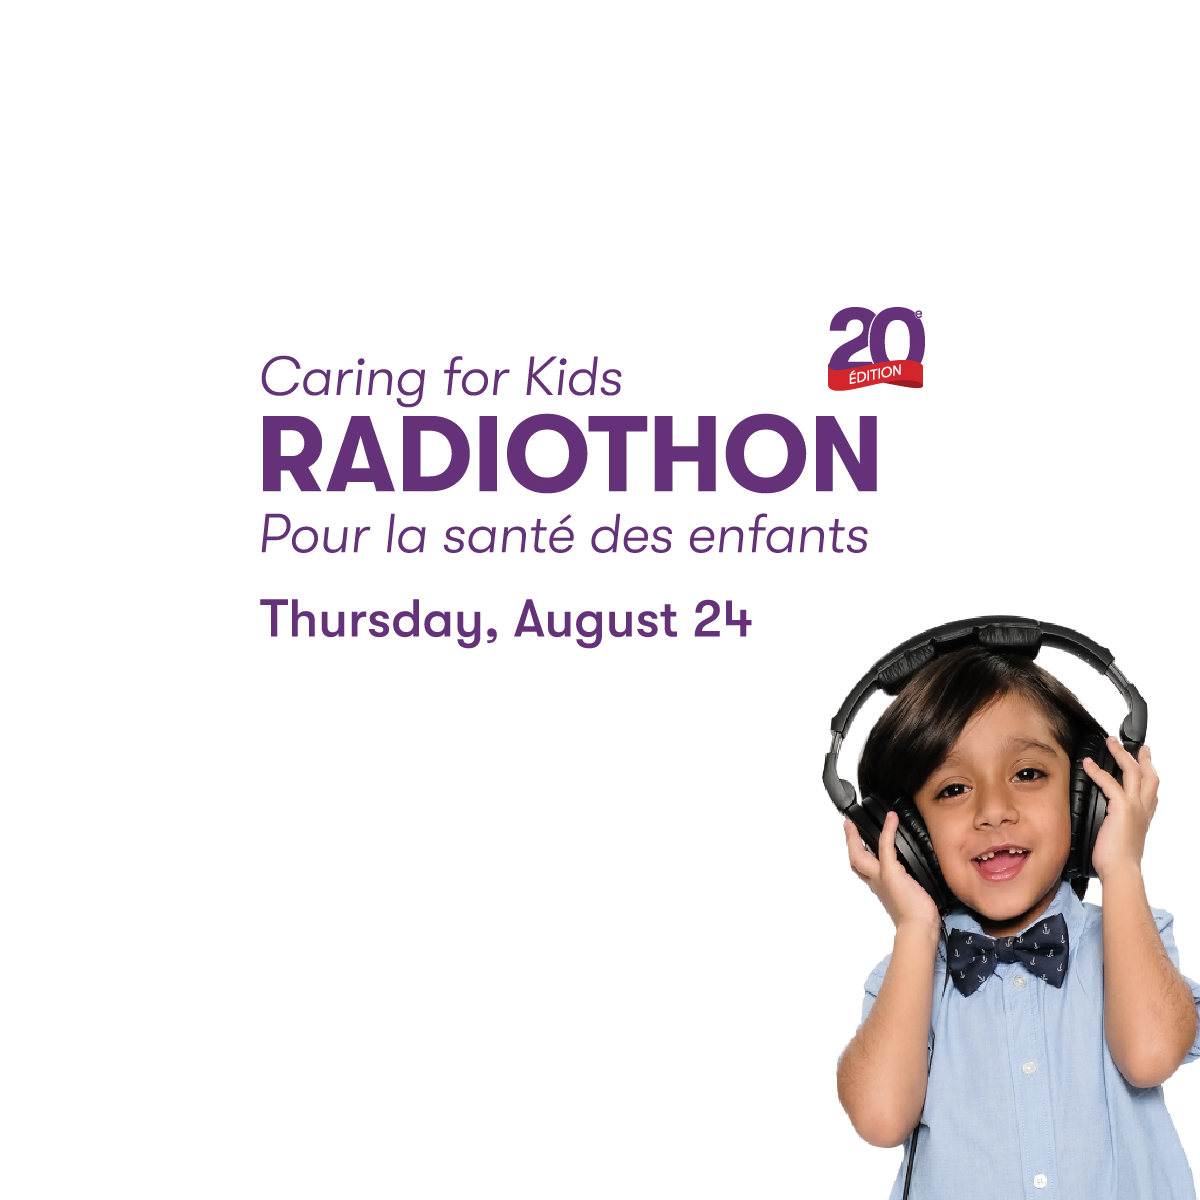 Caring for Kids Radiothon: 9 year old Rita is severely ill with Pfeiffer Syndrome